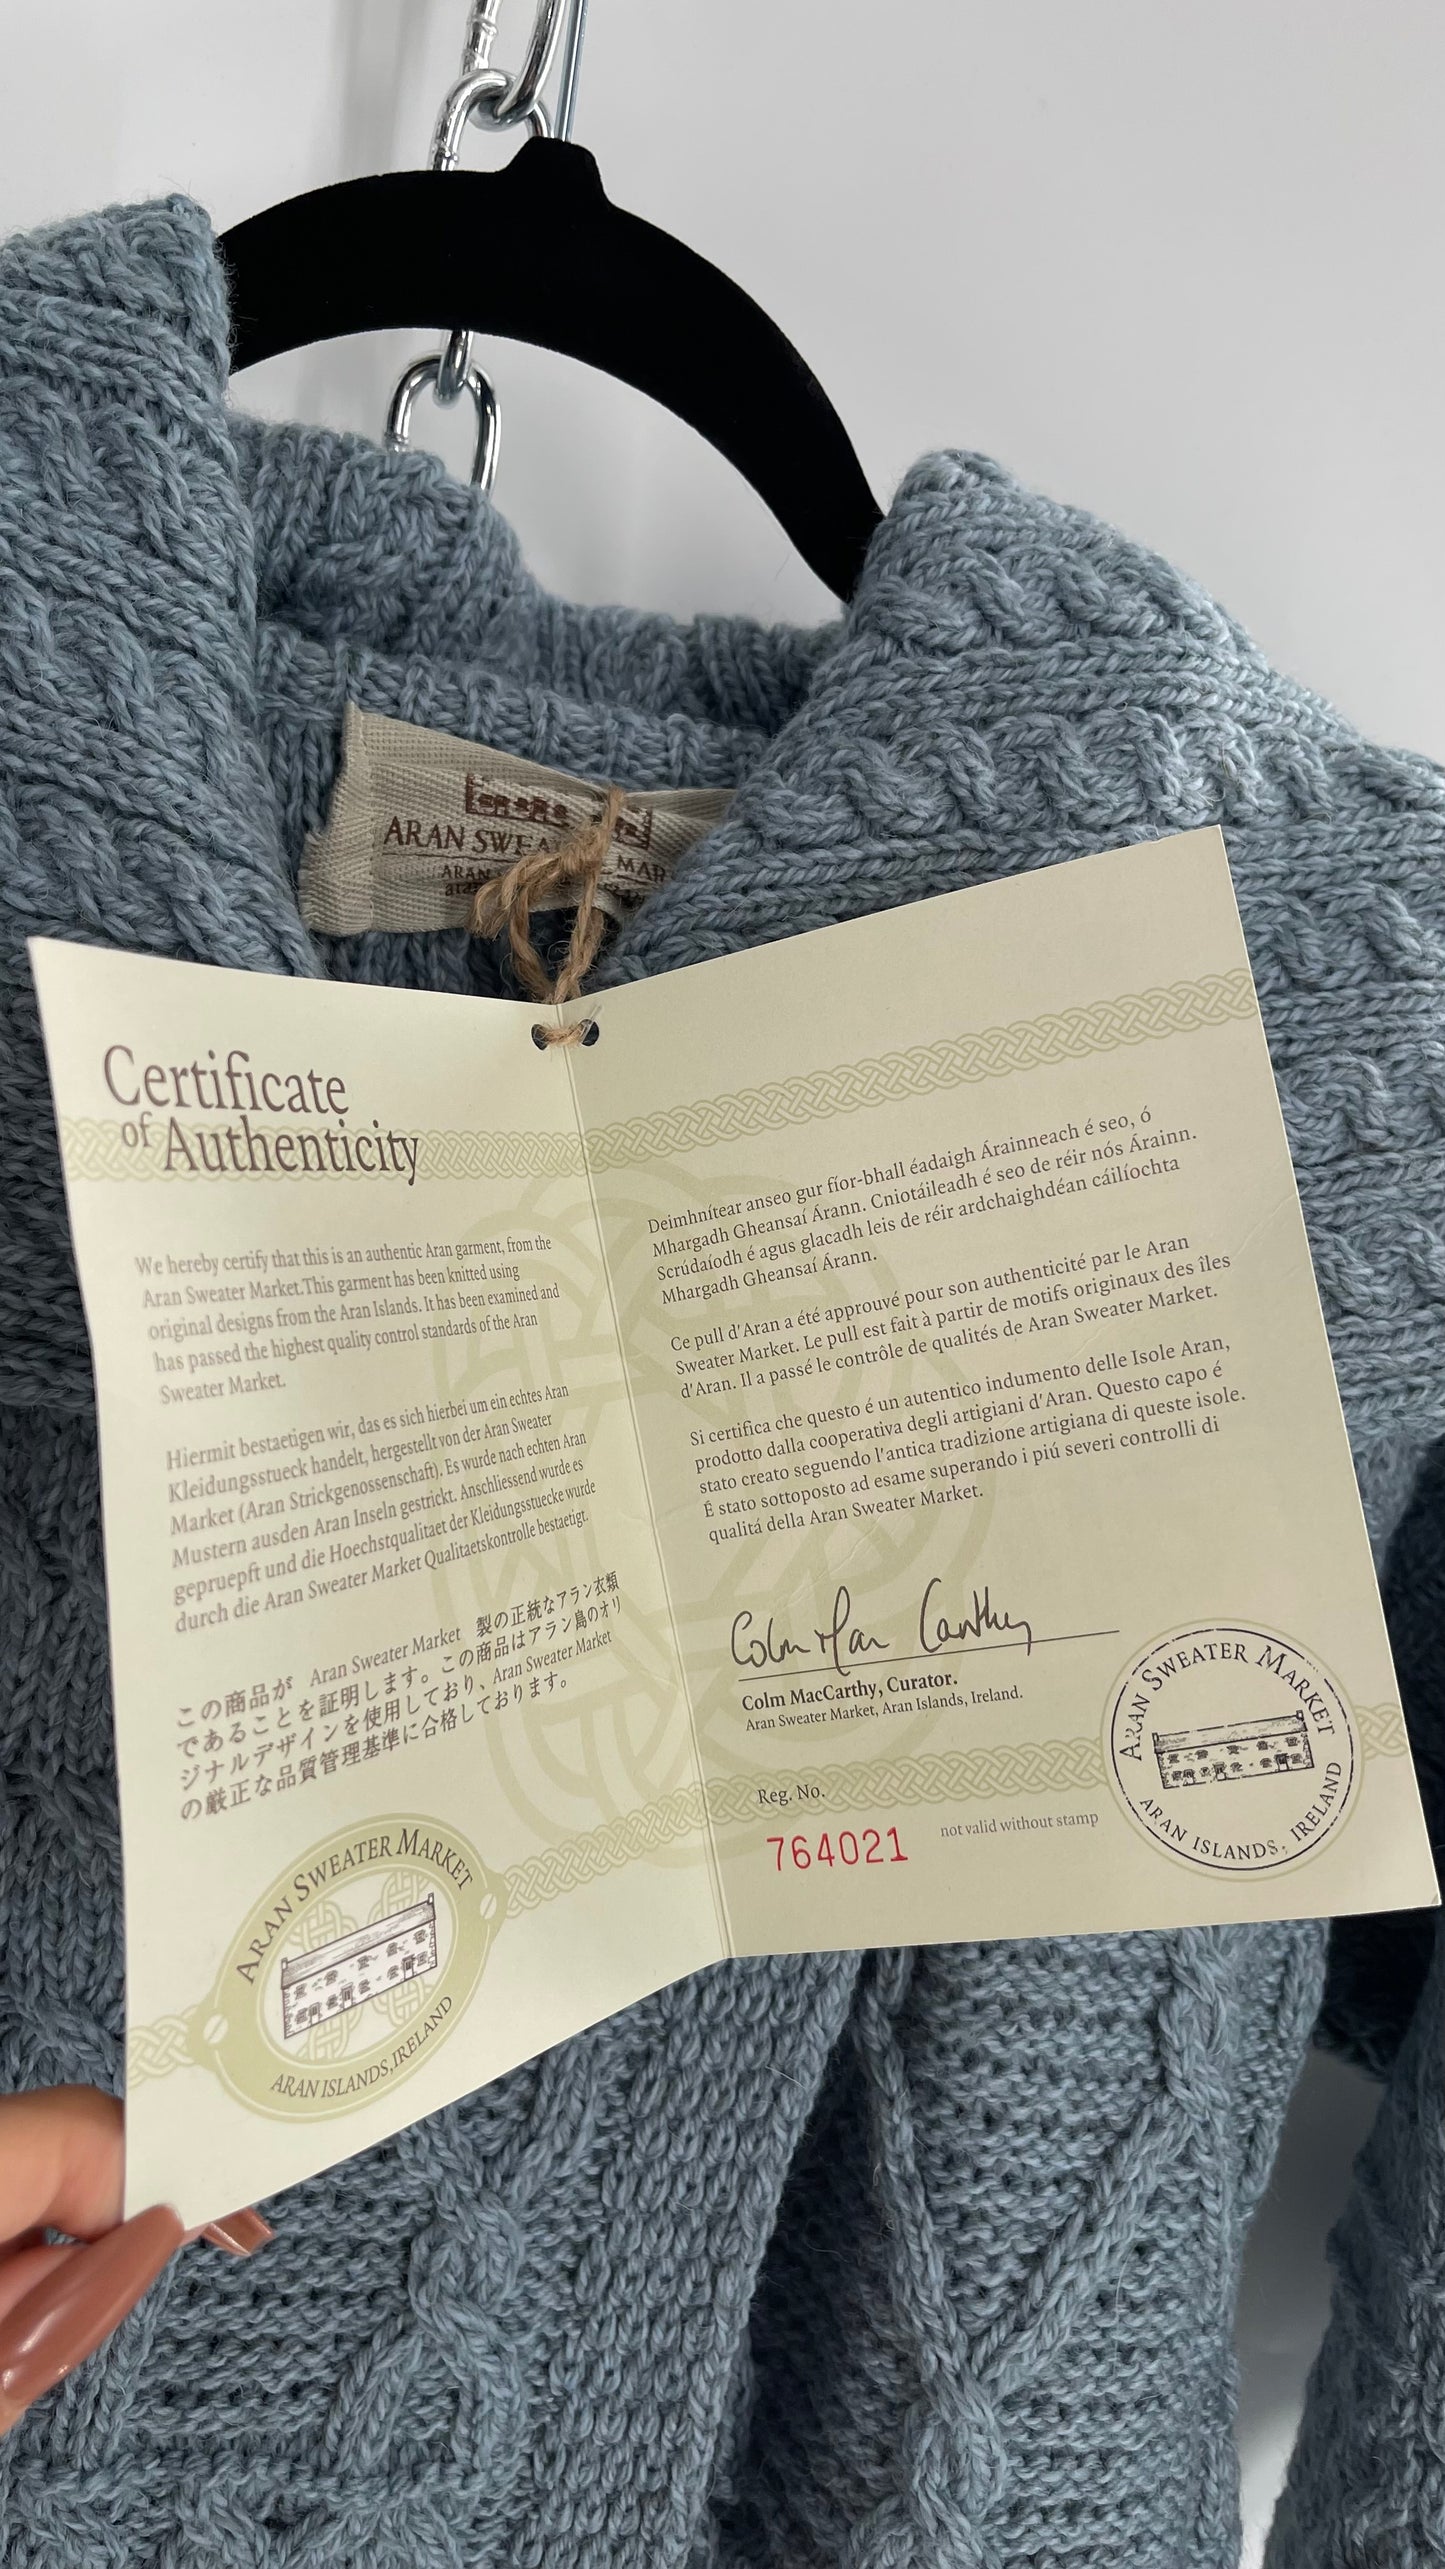 Authentic Irish Aran Sweater Market Slate Blue Aran Stitch Sweater with Oversized Wooden Button Detail and Certificate of Authenticity (Small)